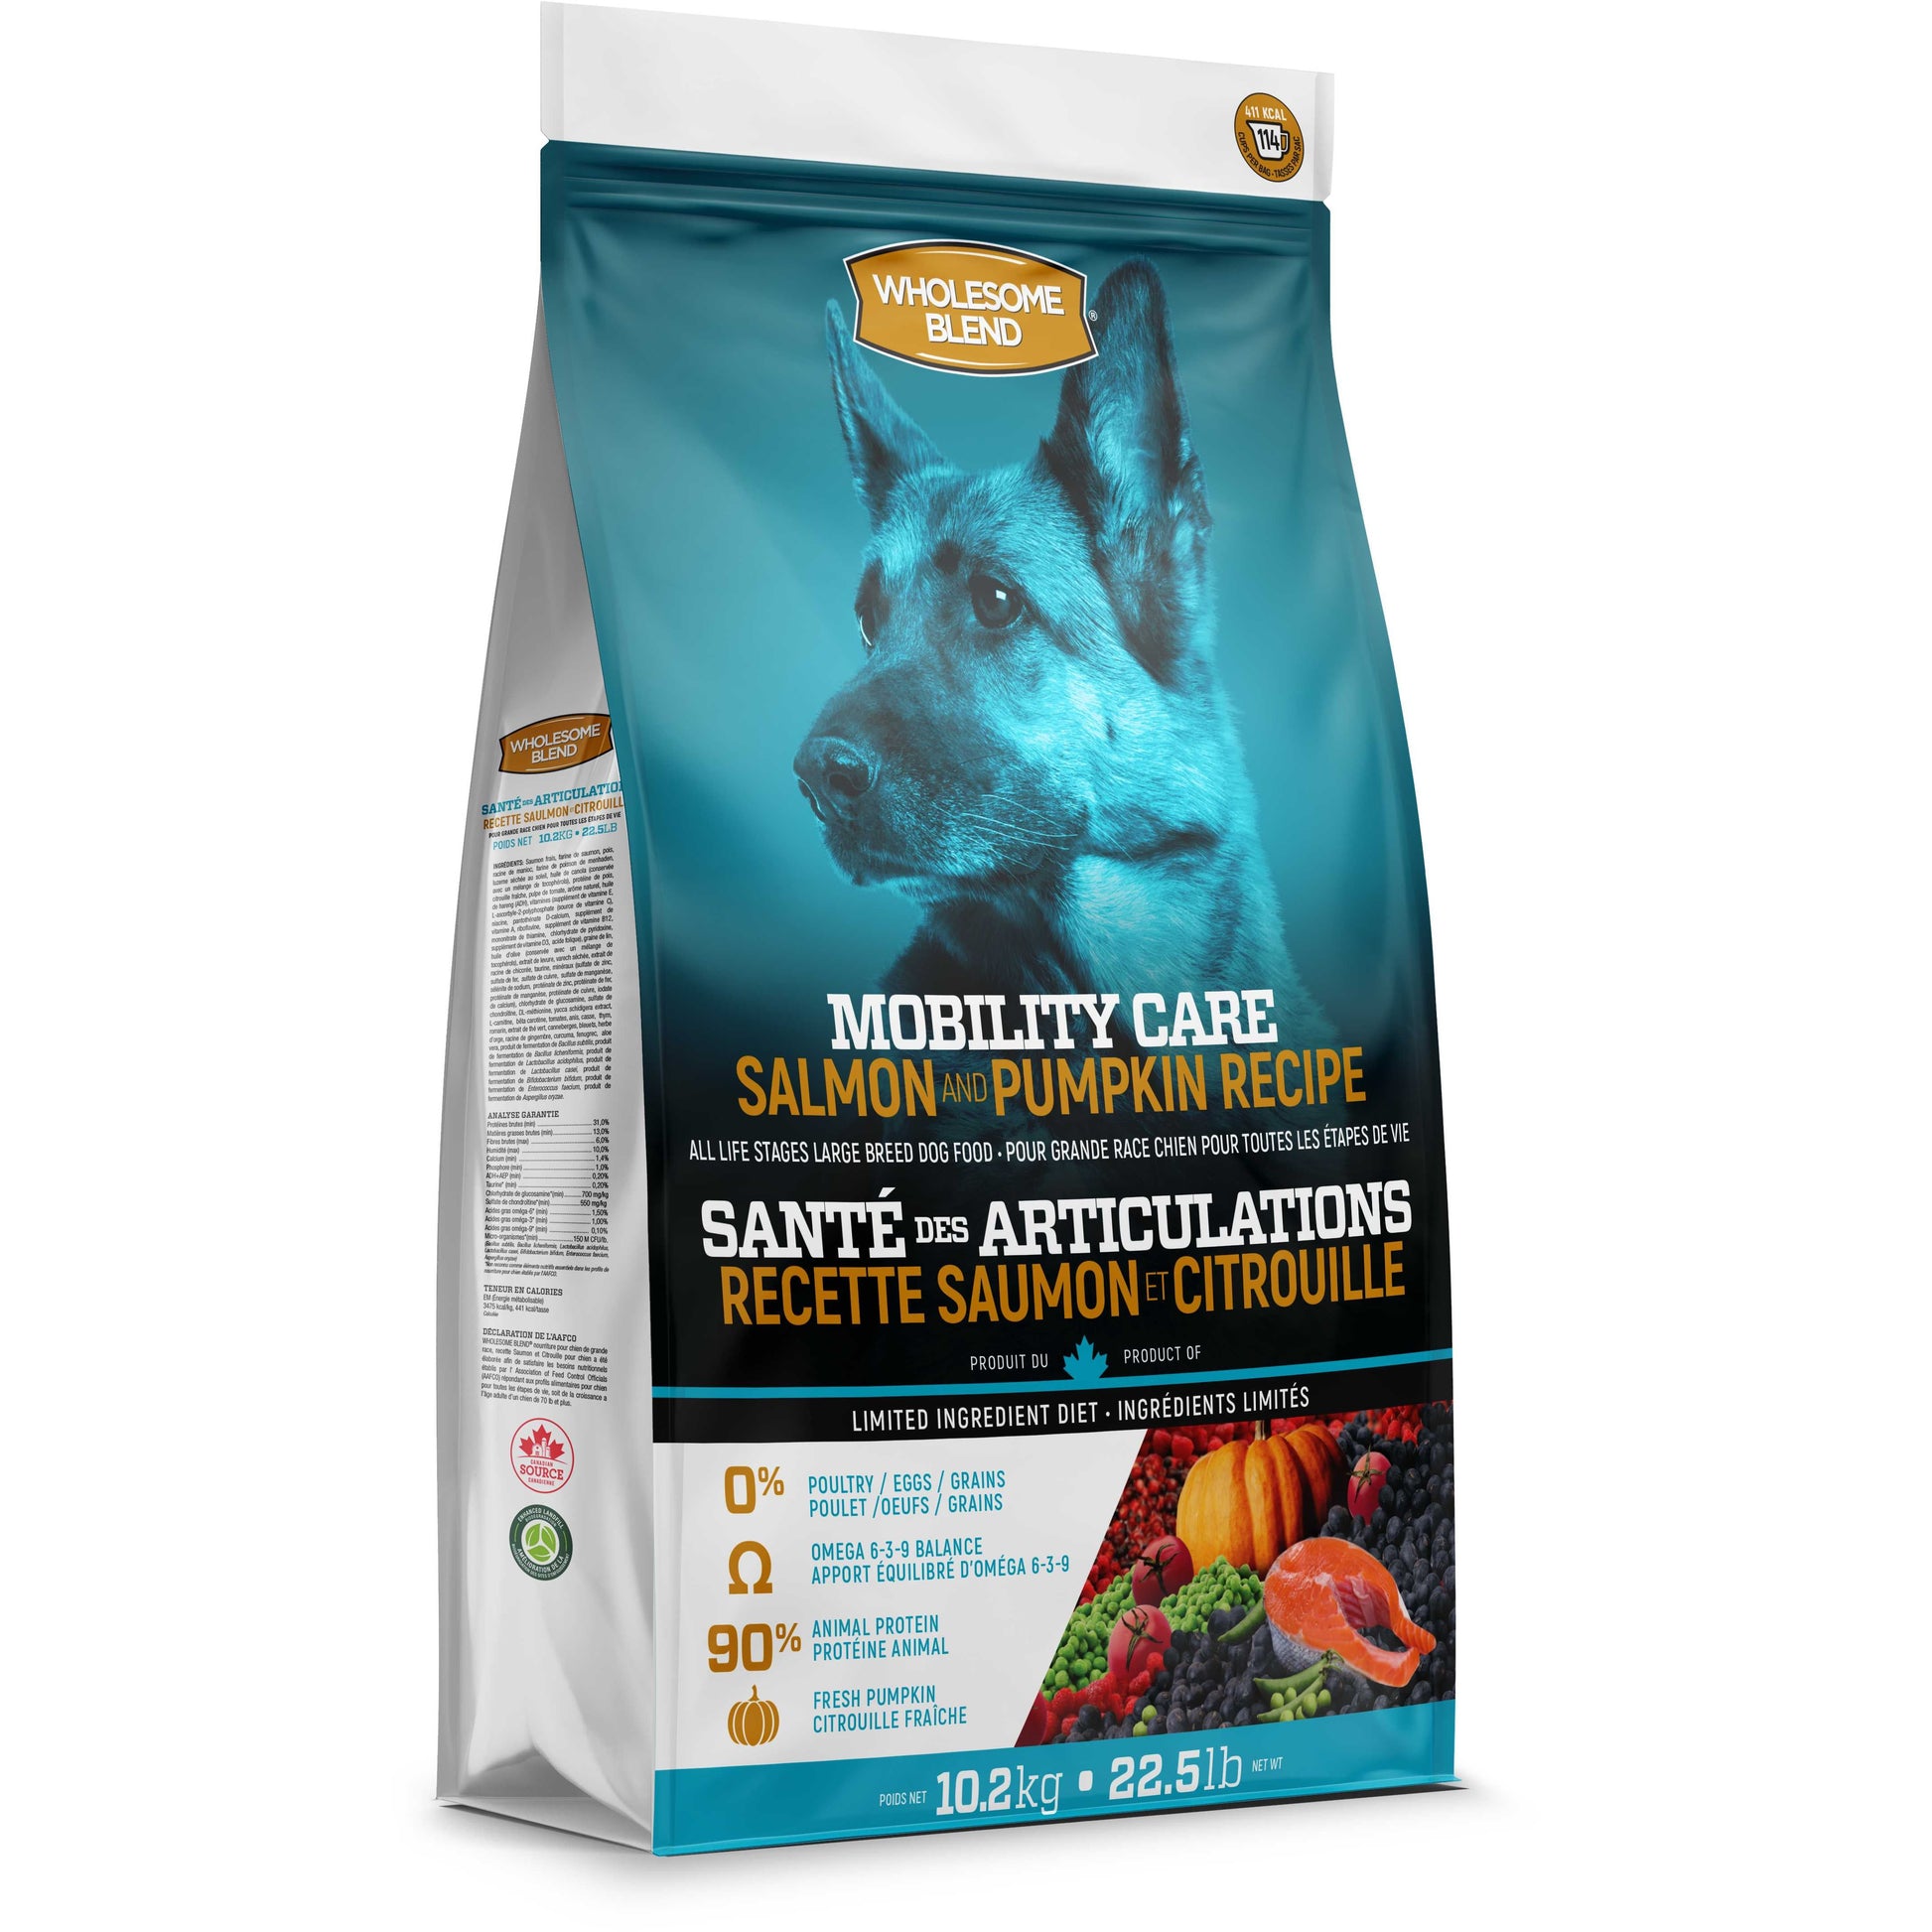 Wholesome Blend Mobility Care Salmon and Pumpkin Dry Dog Food 22.5lb Wholesome Blend